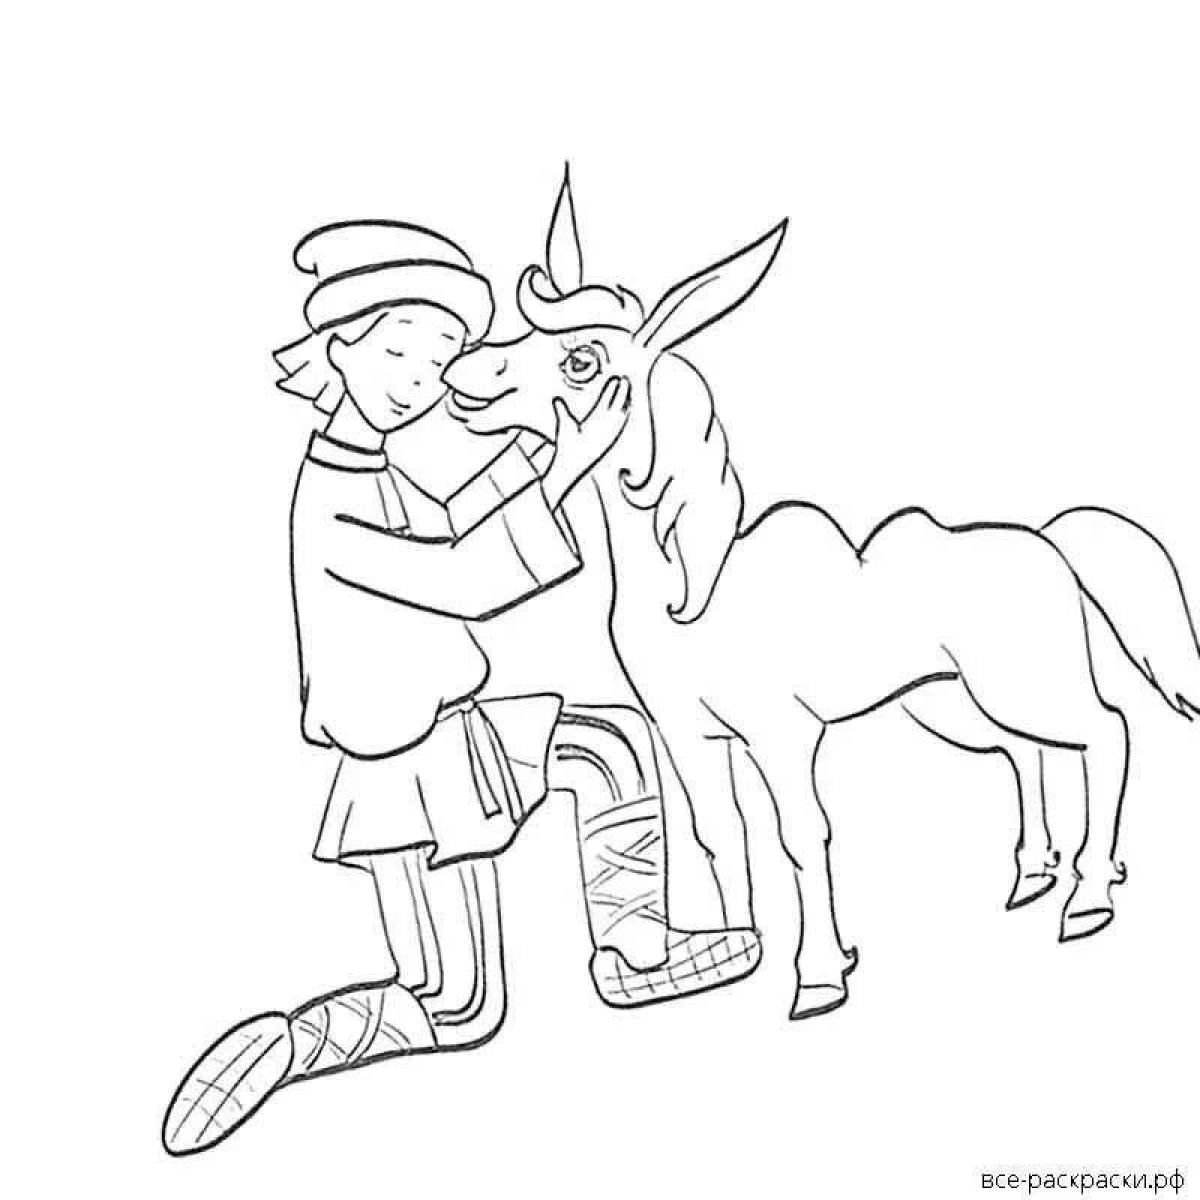 Humpbacked Horse coloring page